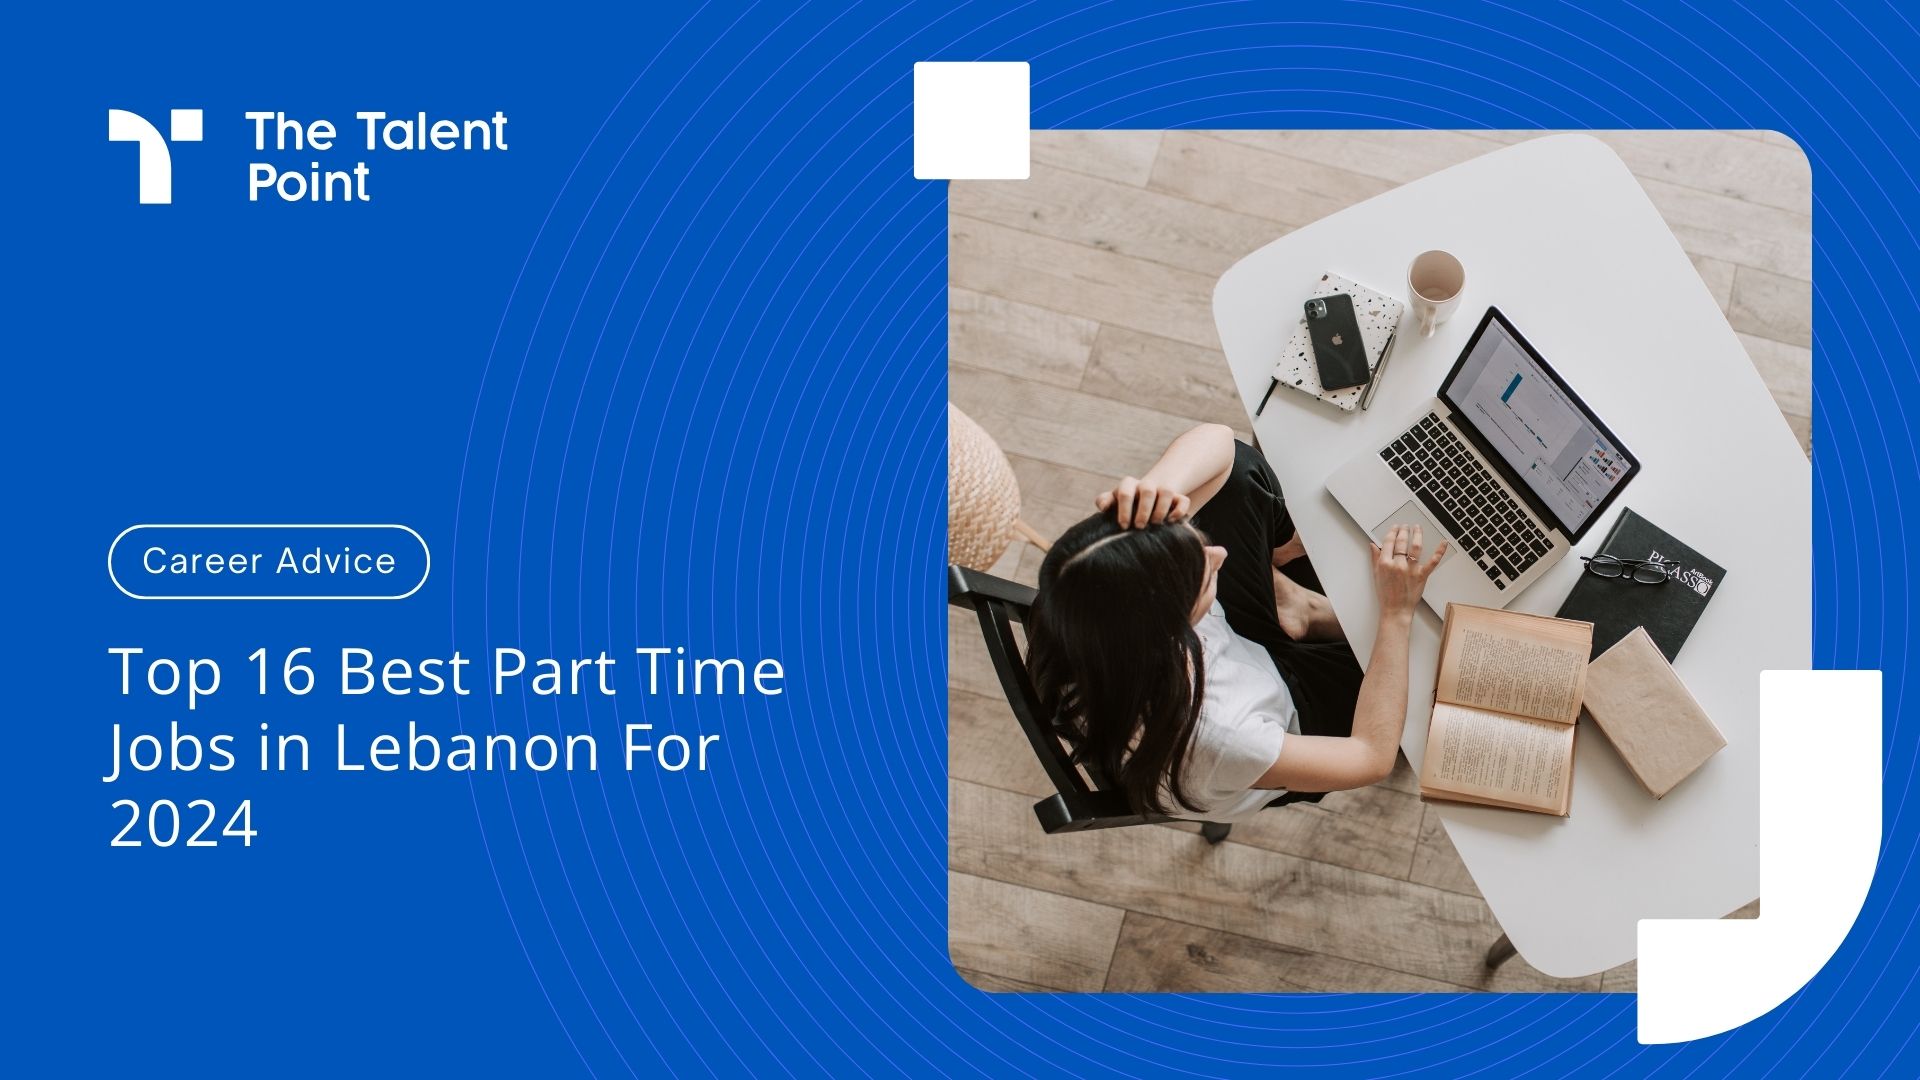 Top 16 Best Part Time Jobs In Lebanon For 2024 - TalentPoint